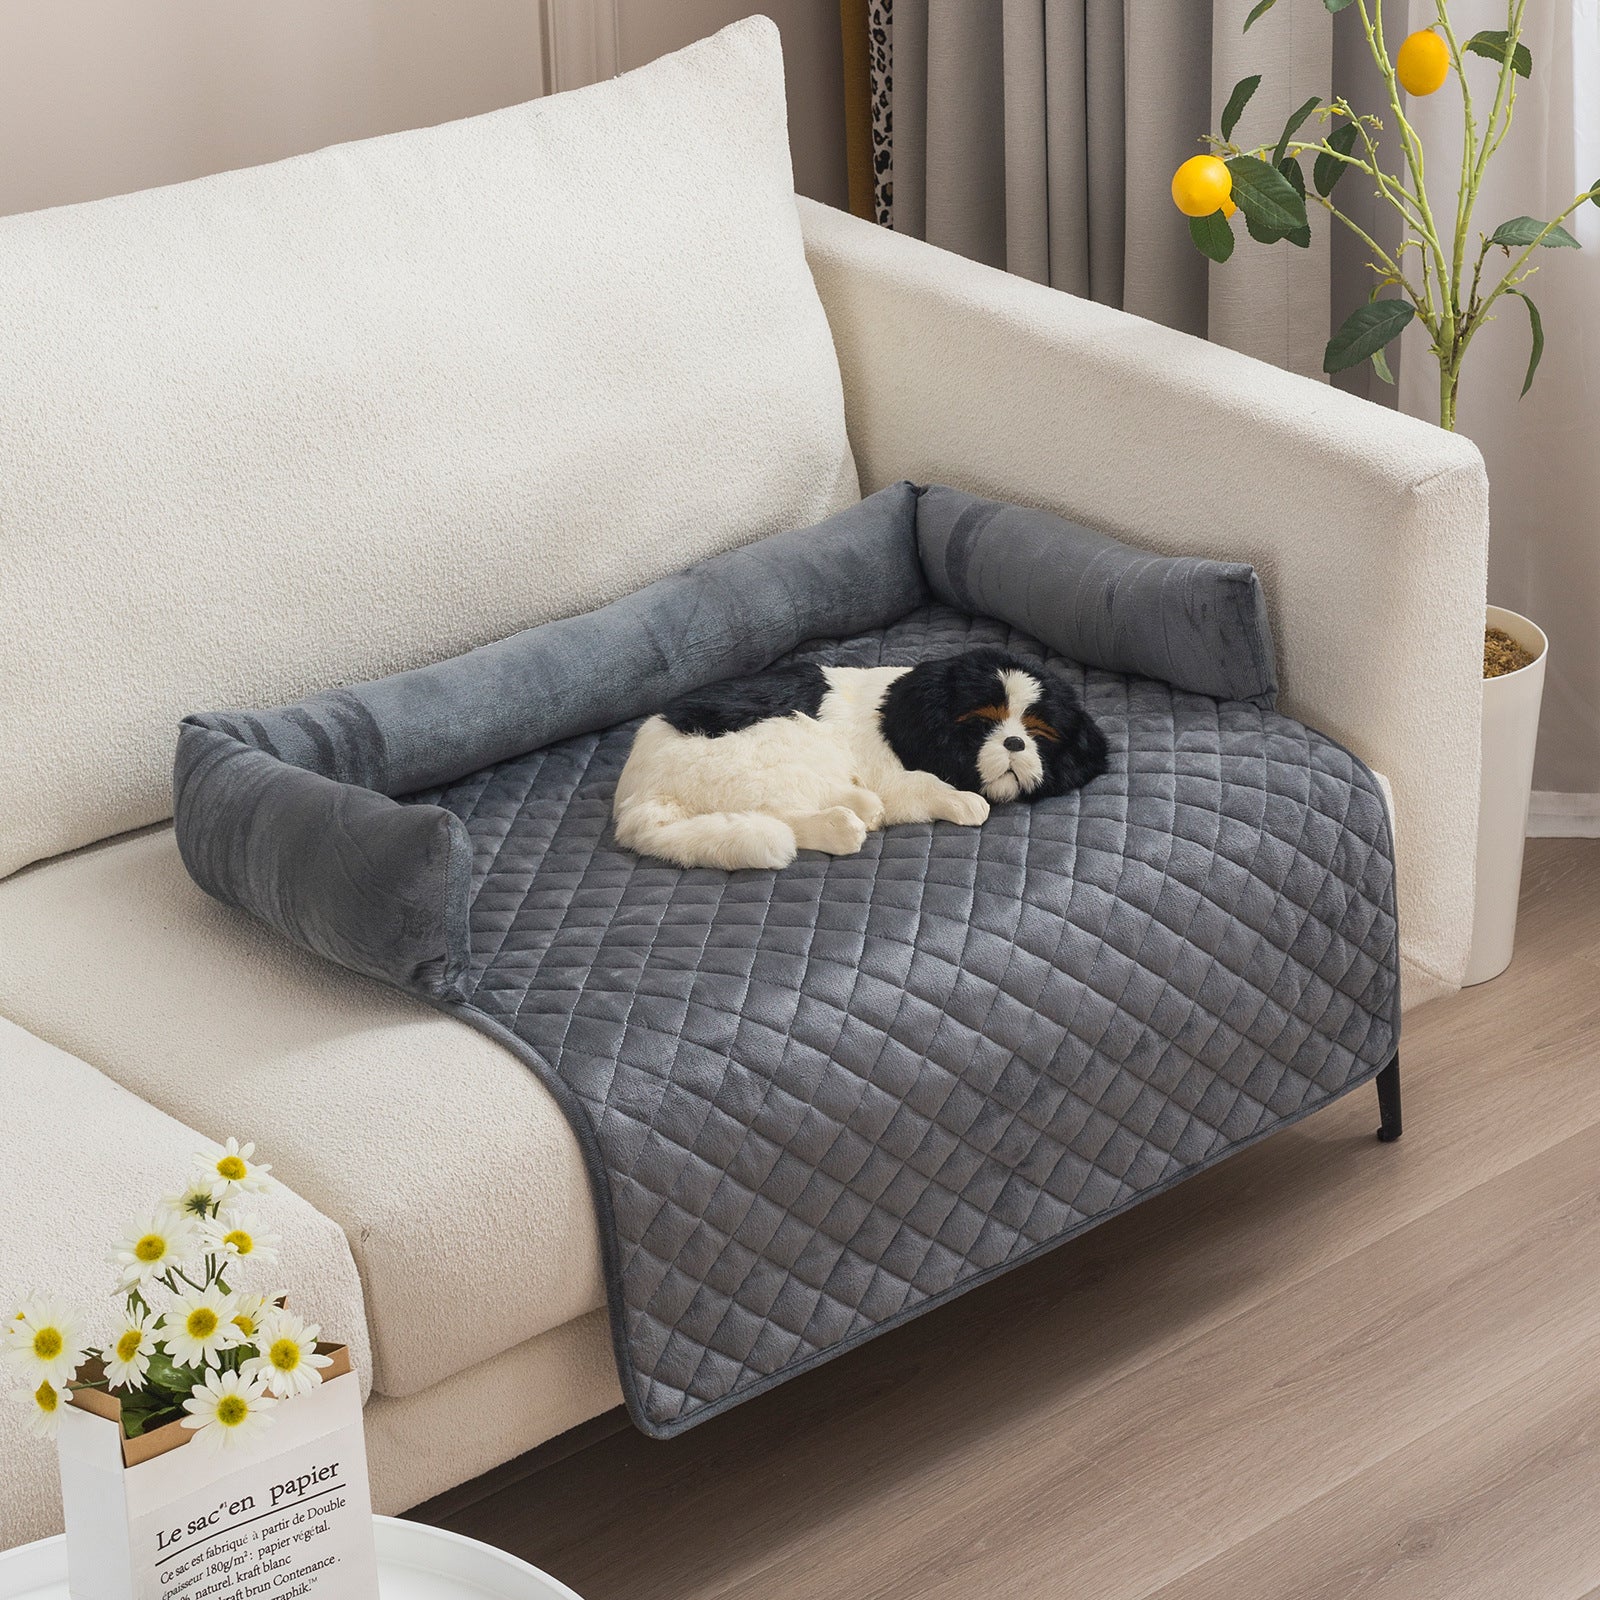 Warm and Cozy Pet Sofa Bed for Large Dogs - Furniture Protector and Cushion